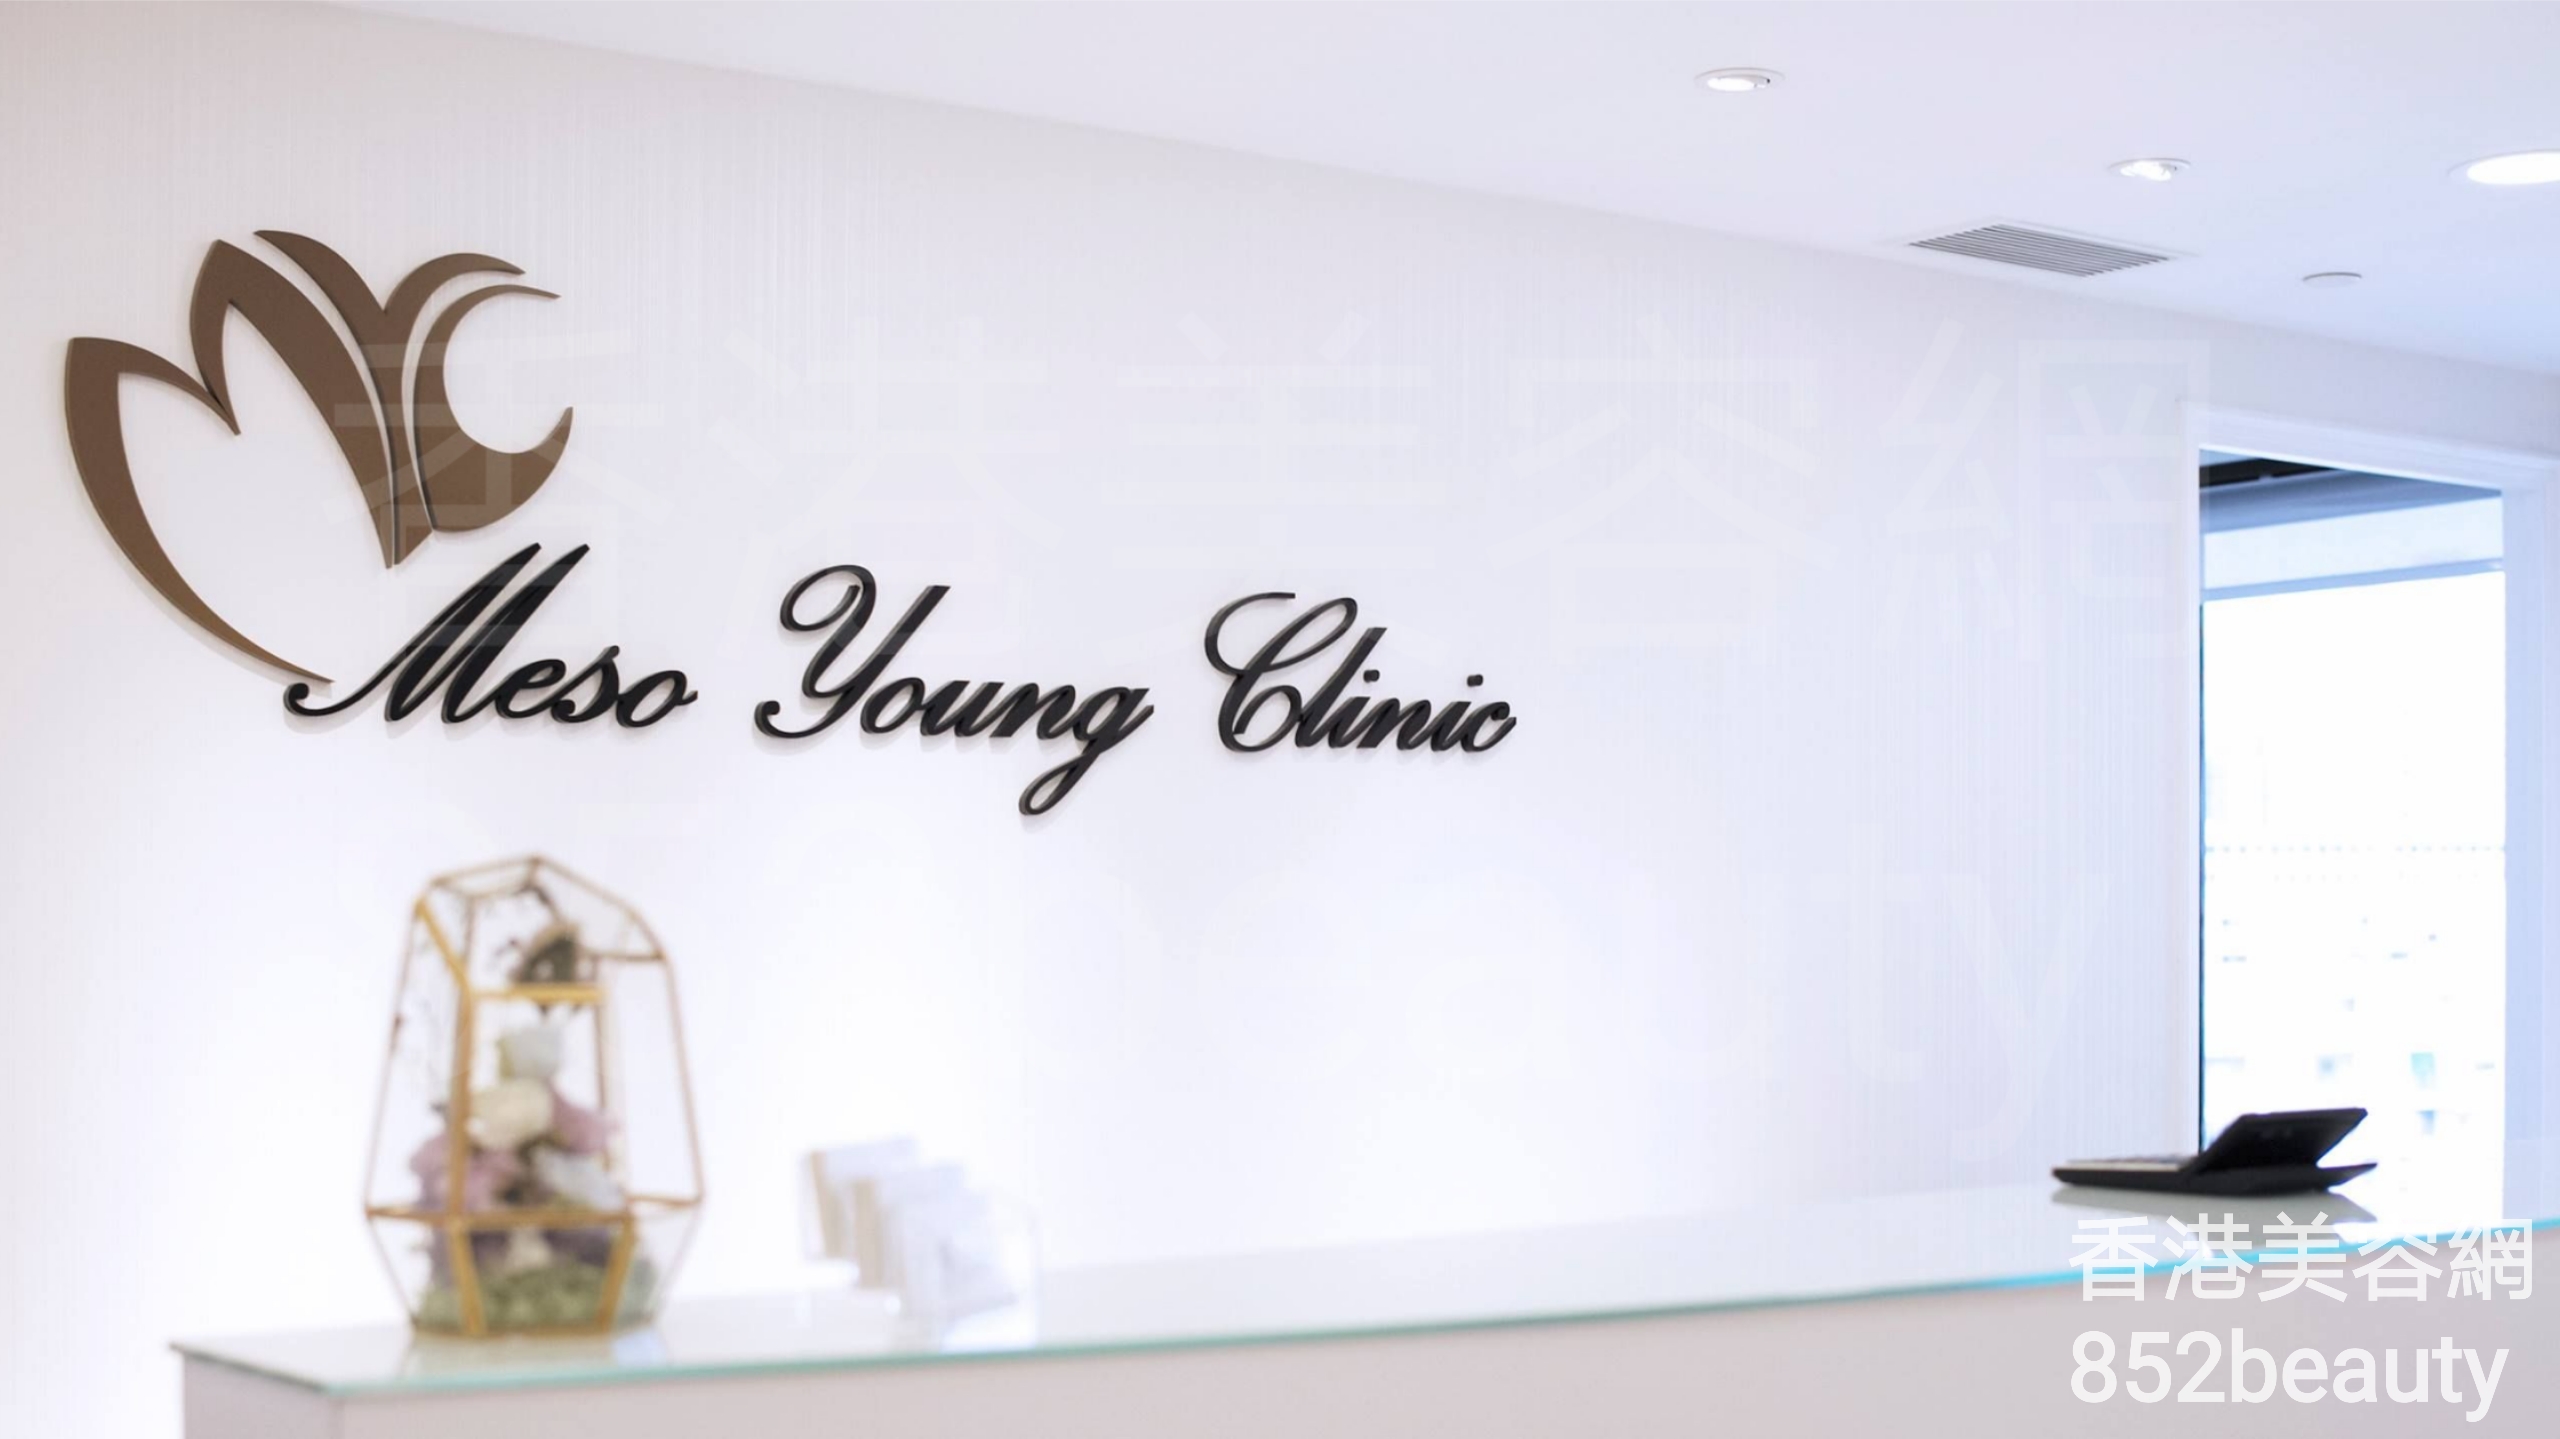 Medical Aesthetics: Meso Young Clinic